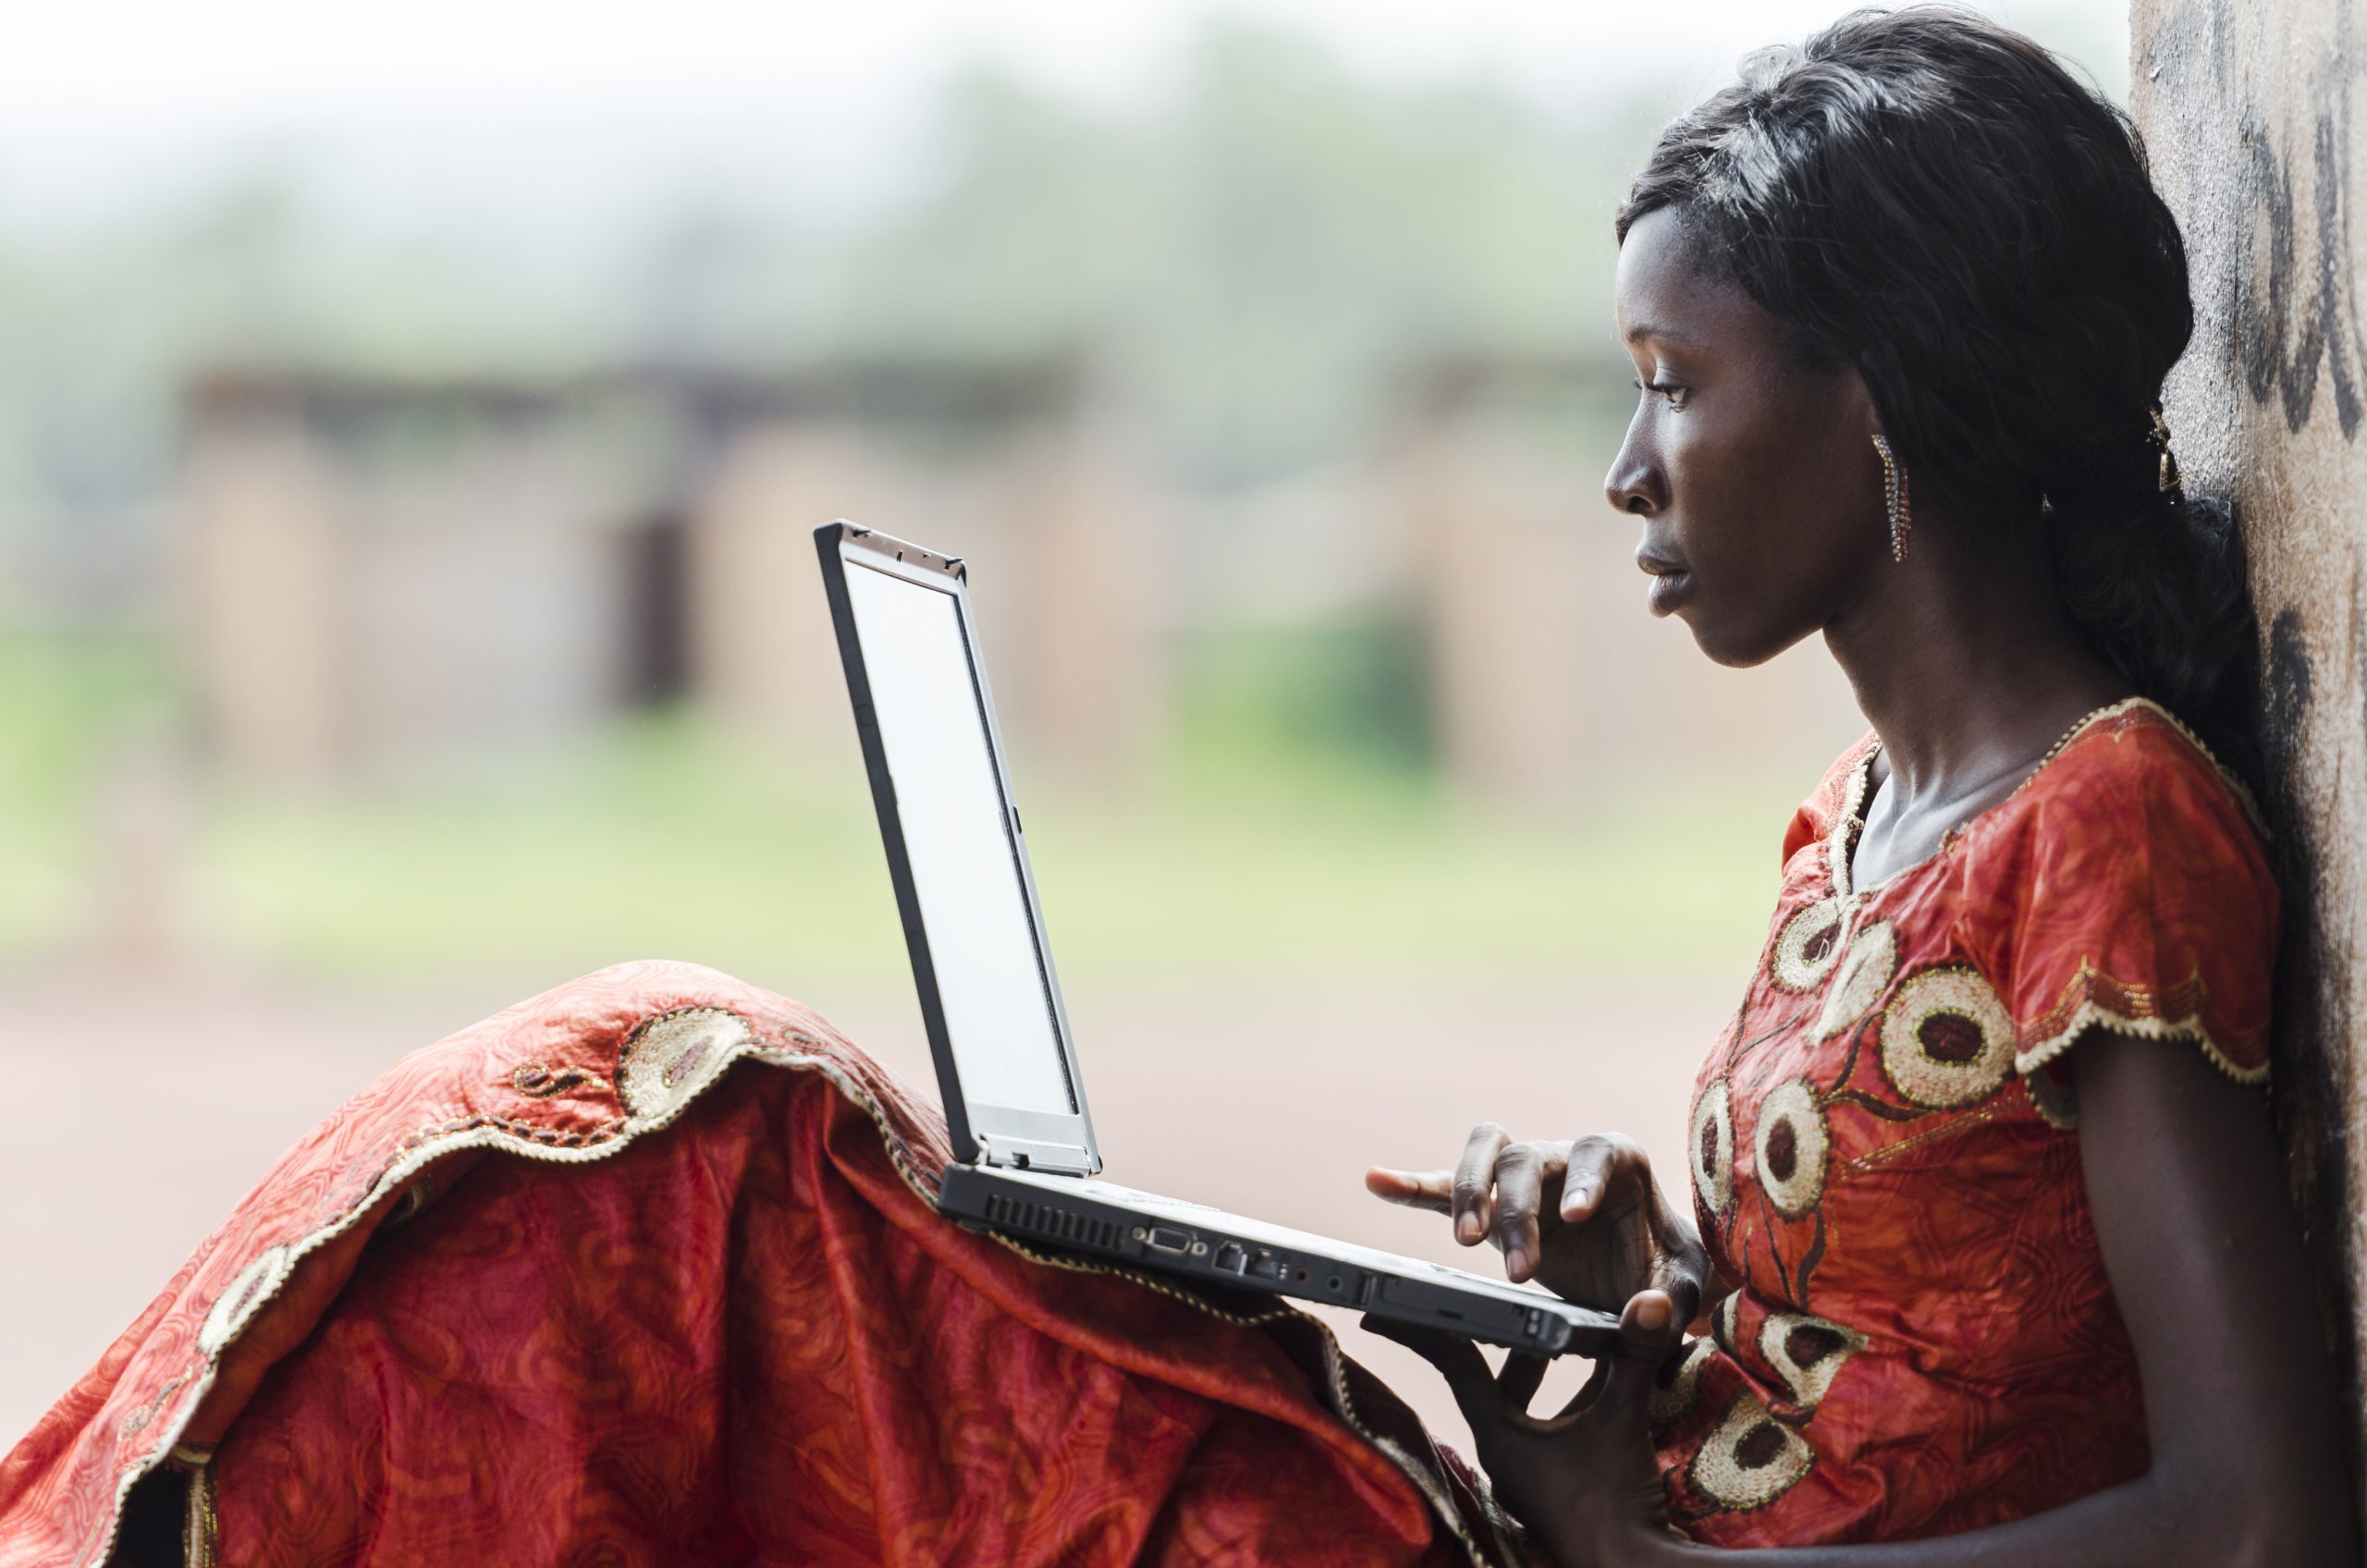 Delivering the full benefits of ICT to the developing world